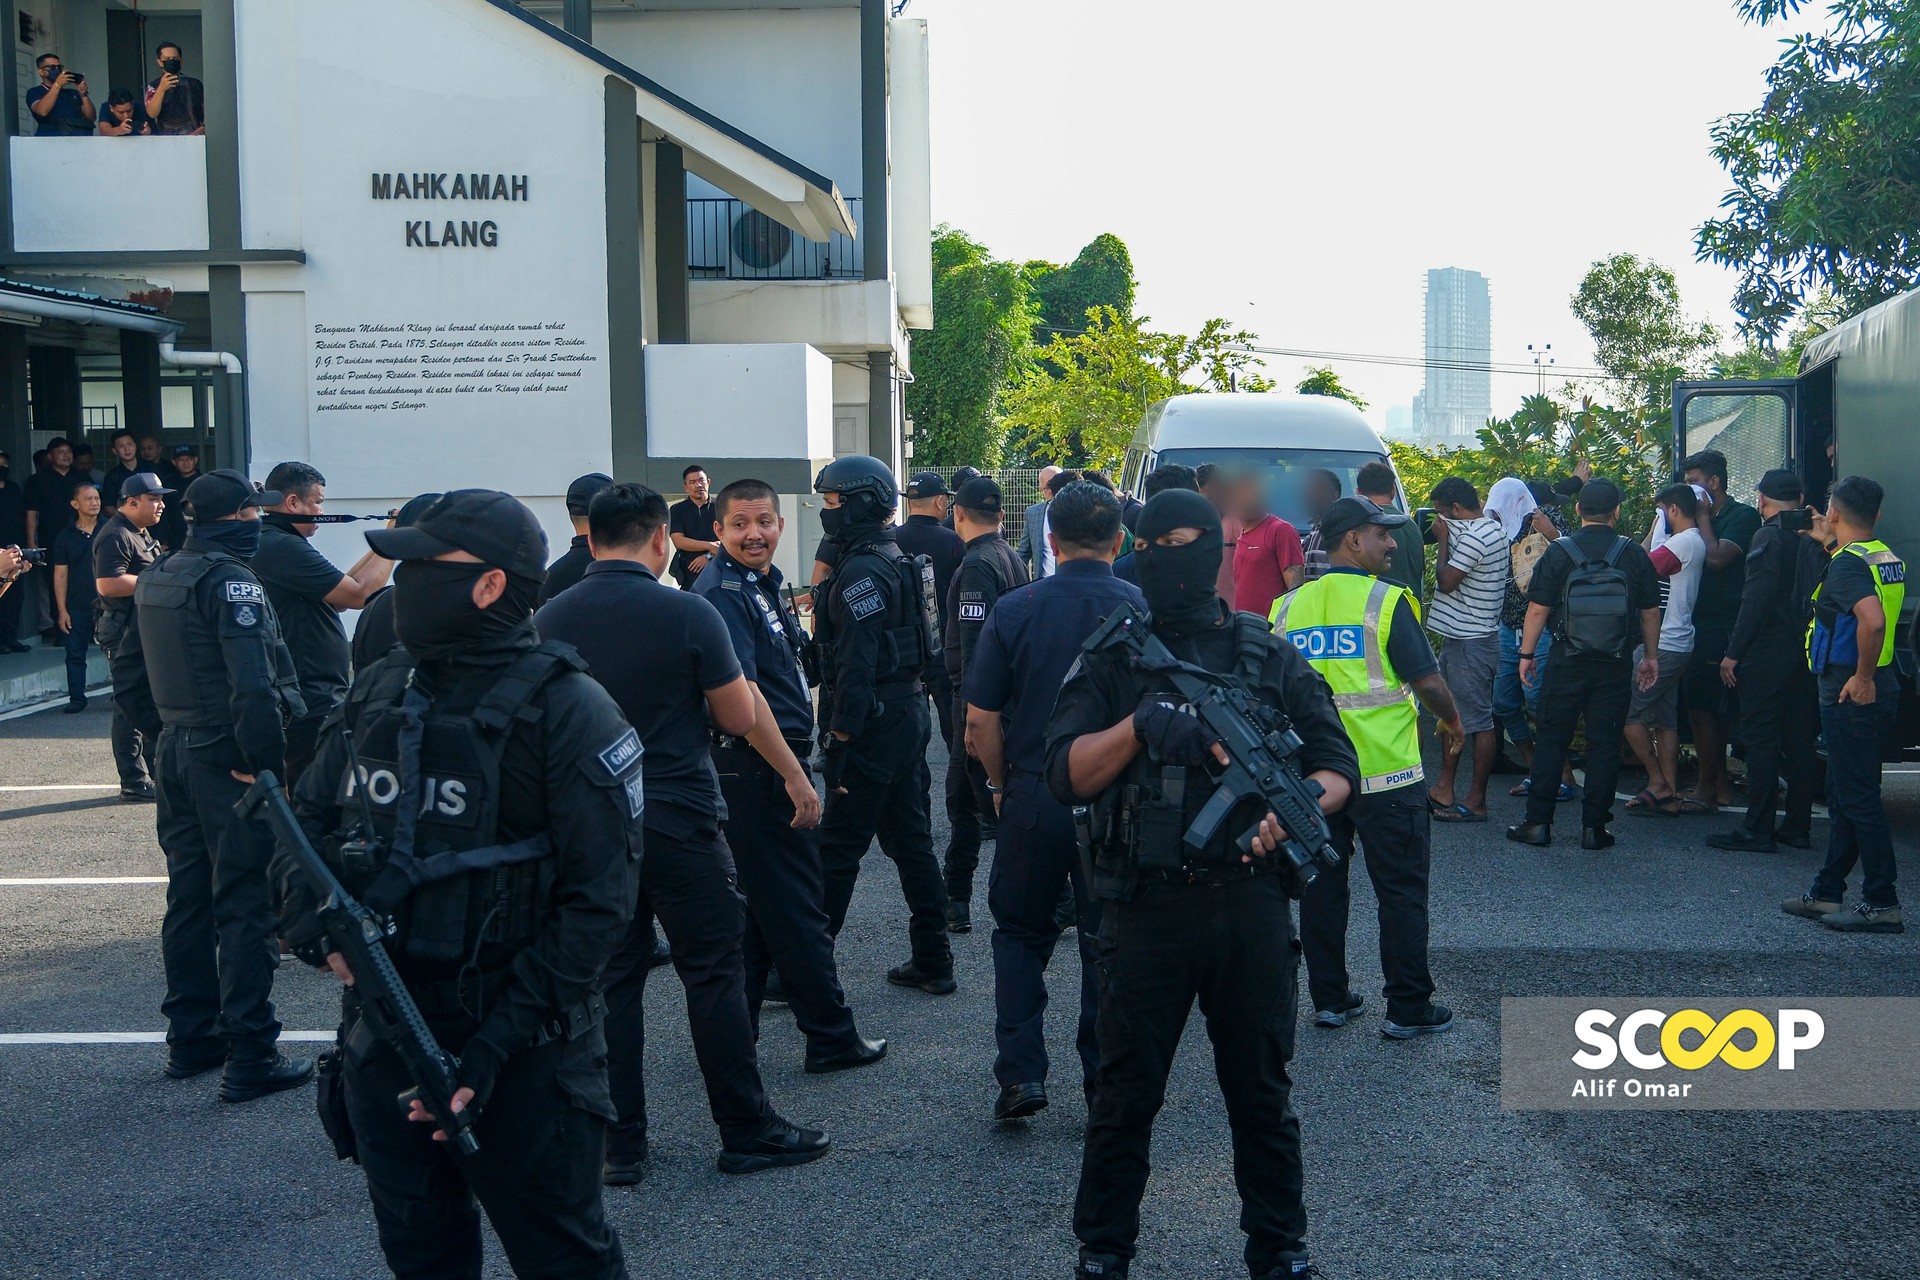 Police arrest 21 members of crime syndicate ‘Gang TR’, 20 to be charged today: Shuhaily